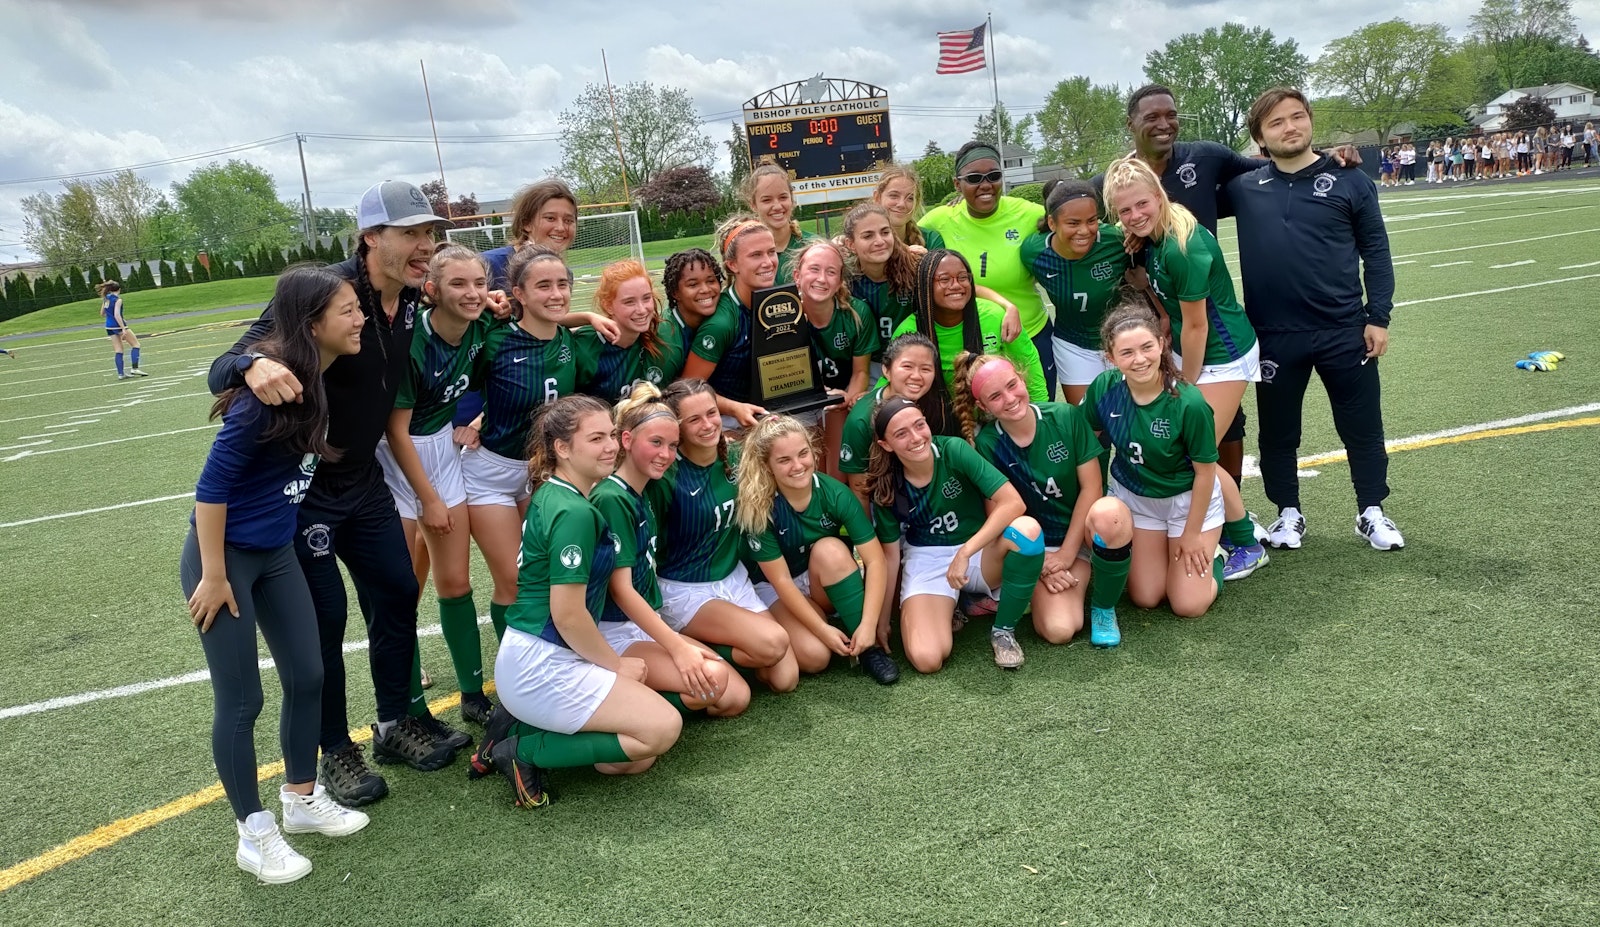 Cranbrook Kingswood celebrates its first Catholic League girls soccer championship since the school joined the CHSL in 2010. The Cranes rallied to beat the Everest/Sacred Heart co-op squad for the Cardinal trophy. (Photo by Don Horkey | Special to Detroit Catholic)